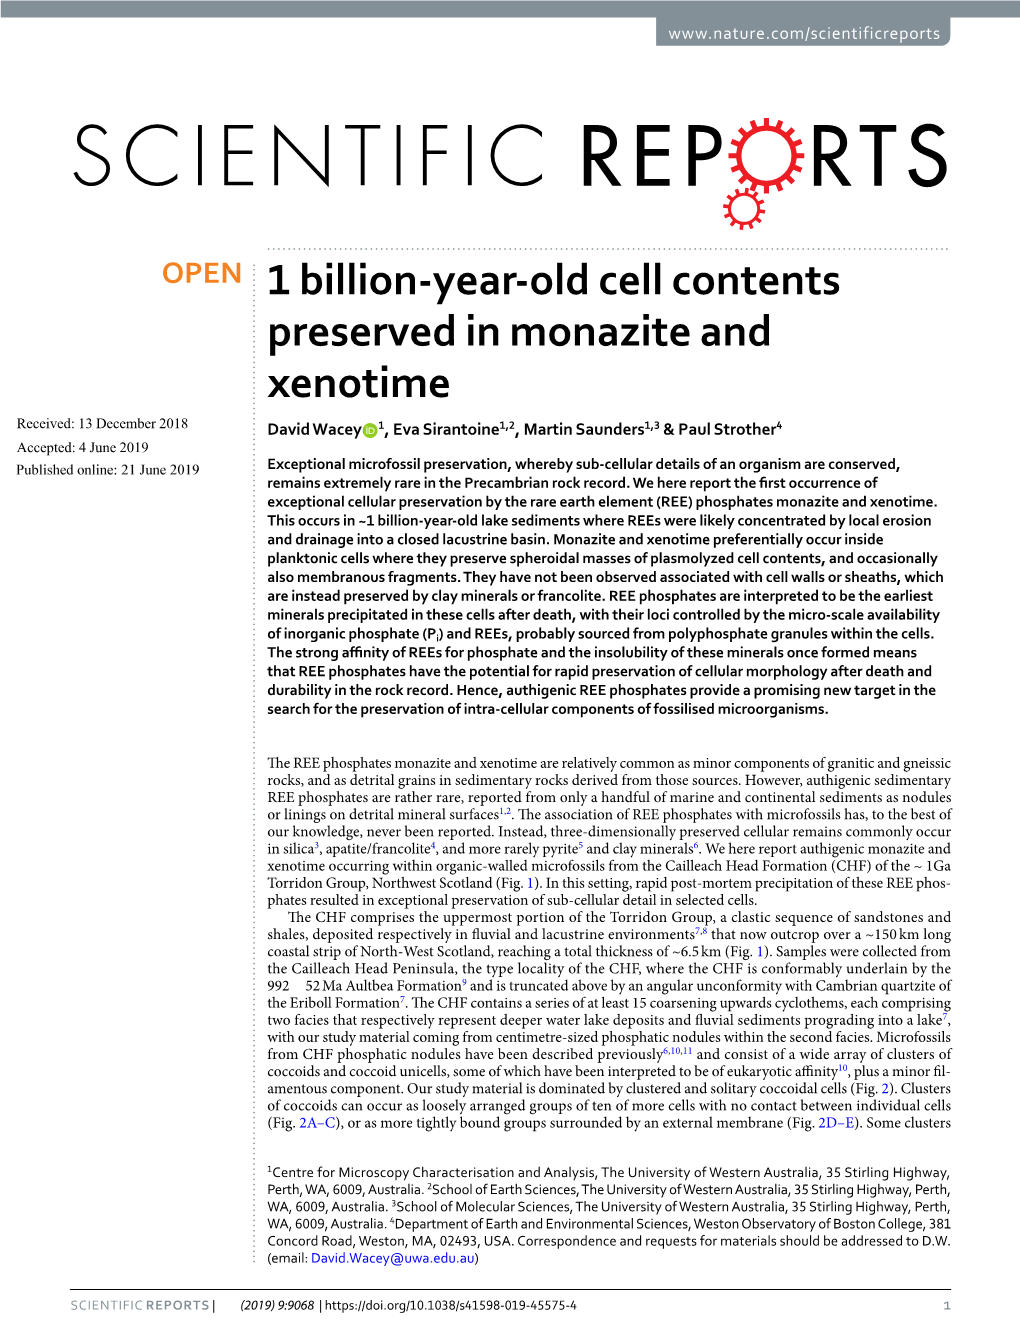 1 Billion-Year-Old Cell Contents Preserved in Monazite and Xenotime